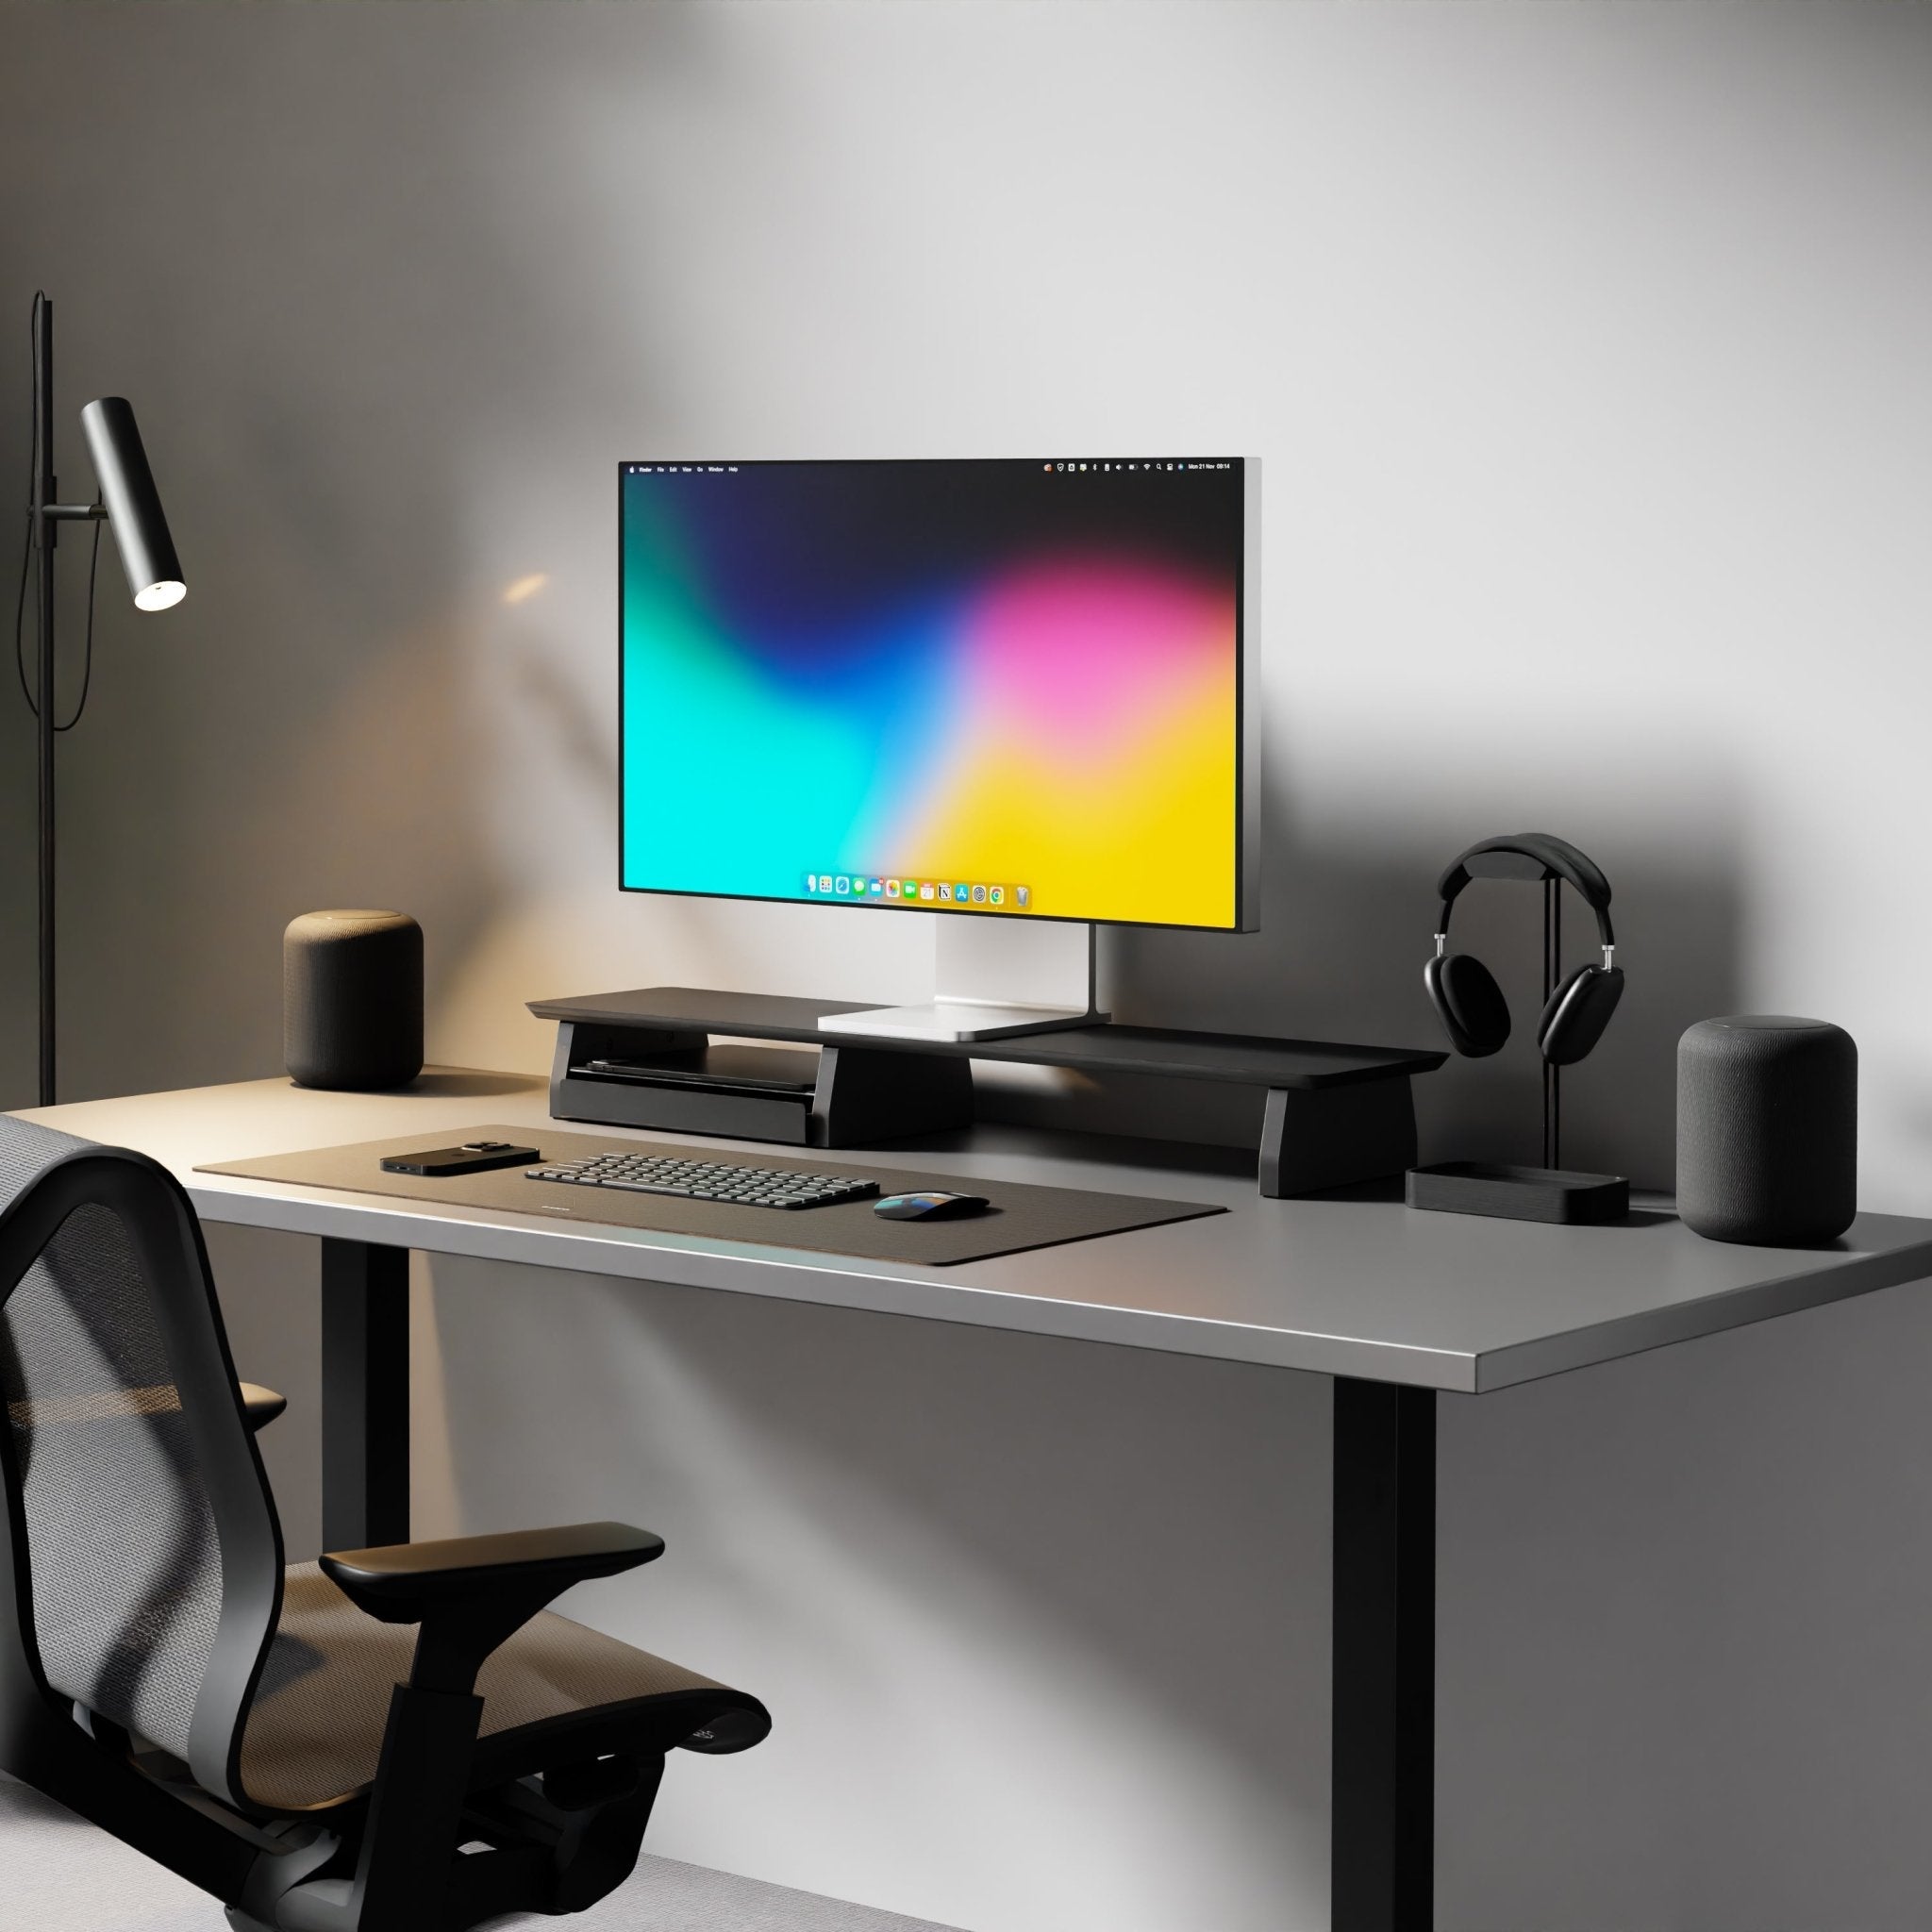 modern desk setup with this black desk shelf for monitor stand, black leather desk mat & headphone stand. An alternative to the popular Grovemade design, this monitor stand provides extra storage and organization for your desk while also elevating your screen to a more ergonomic height